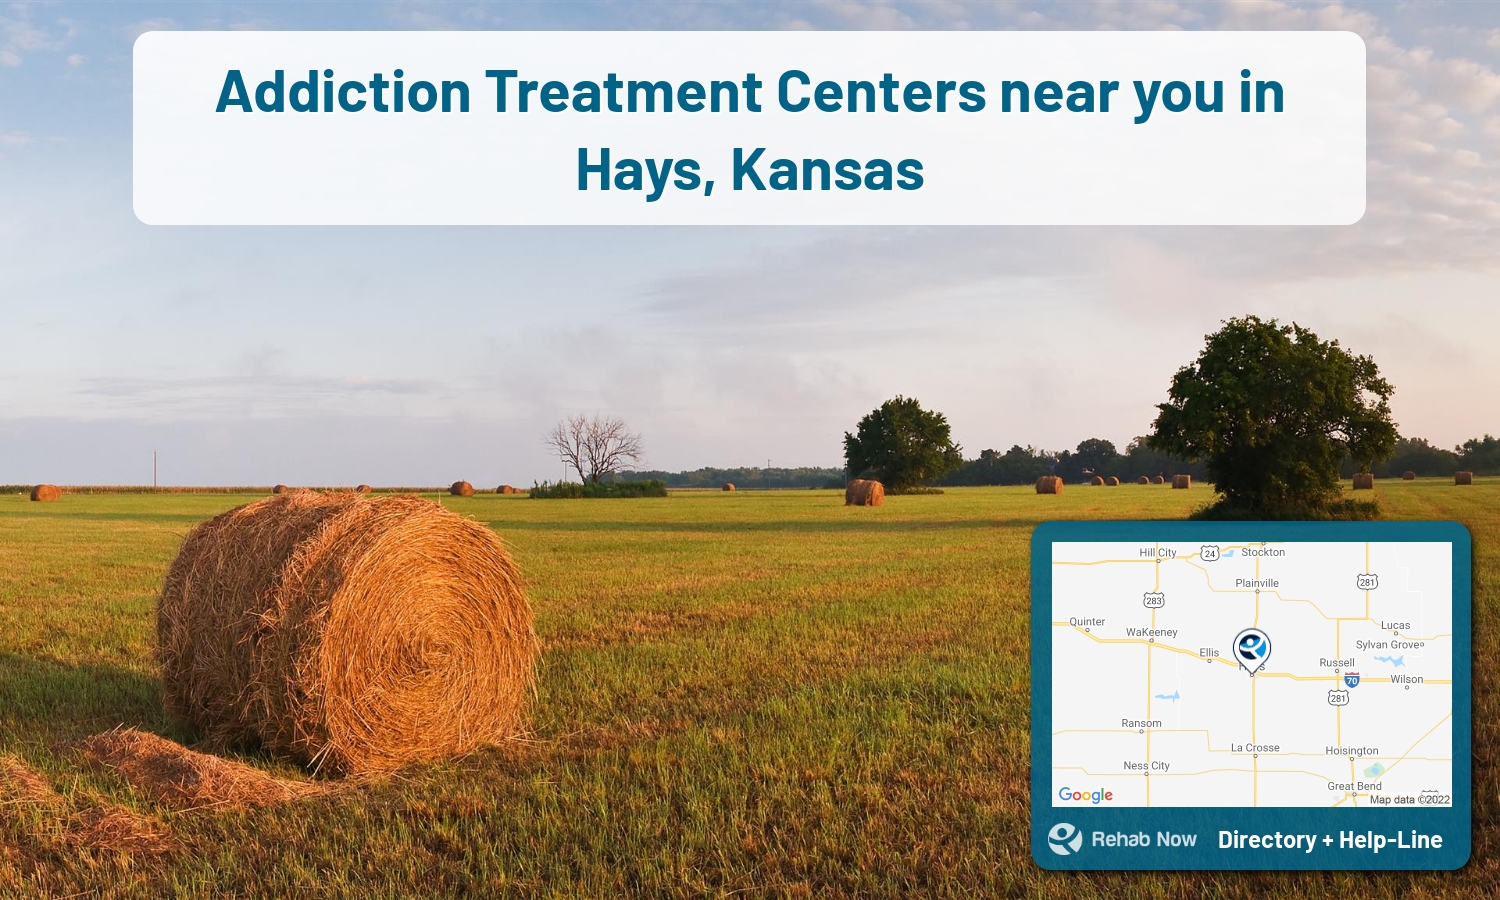 Hays, KS Treatment Centers. Find drug rehab in Hays, Kansas, or detox and treatment programs. Get the right help now!